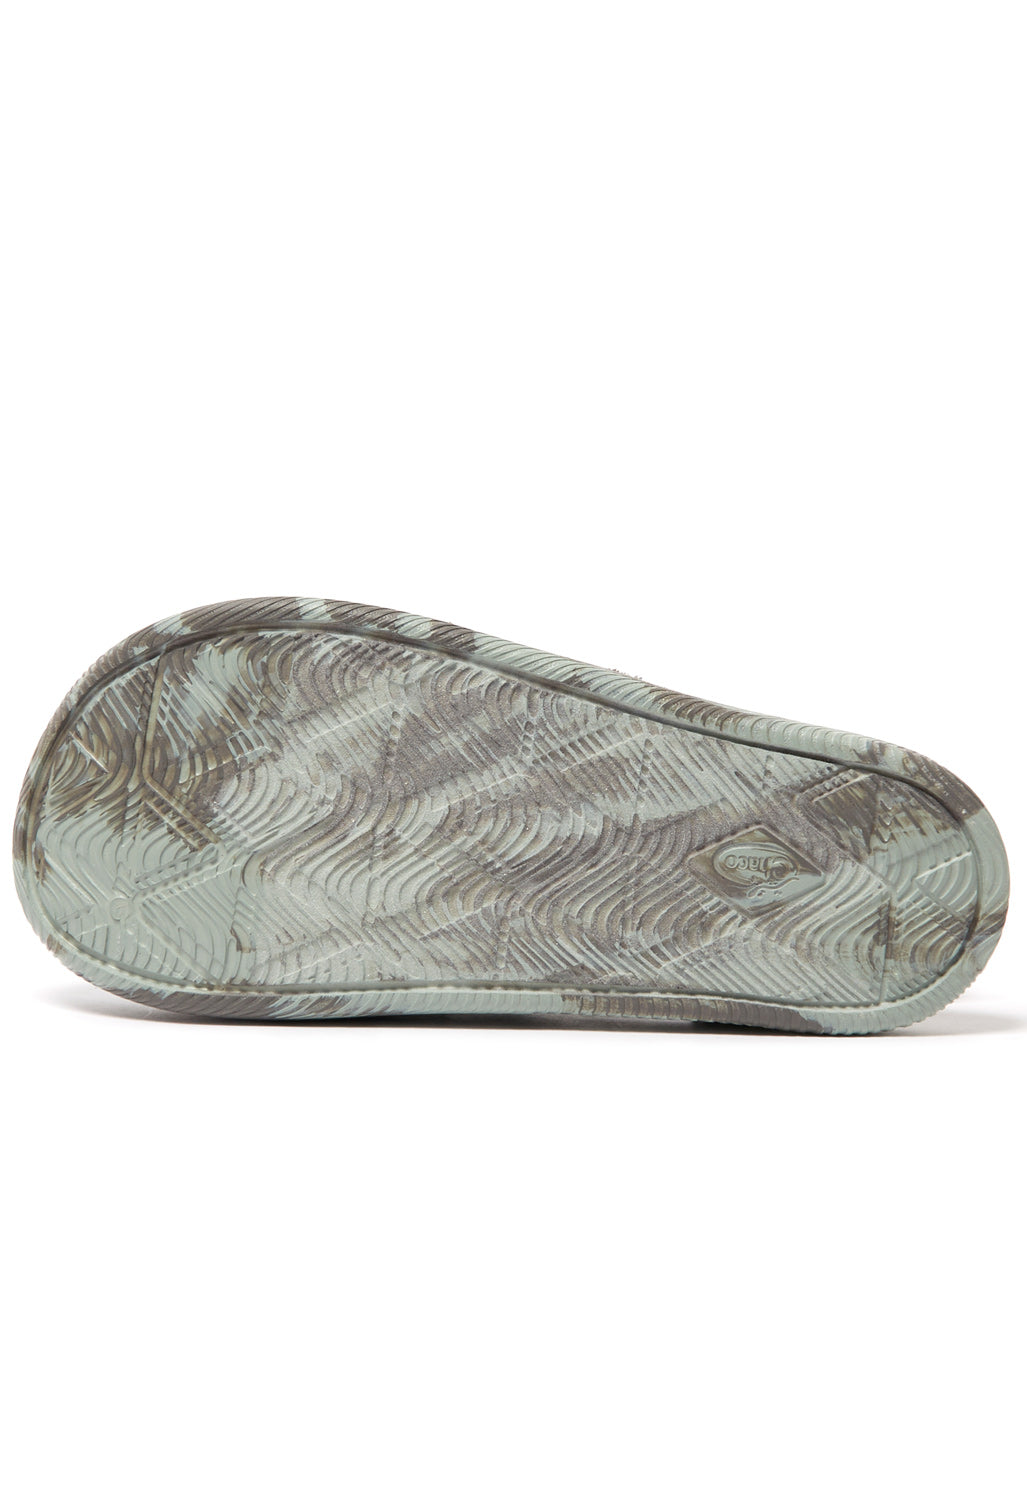 Chaco Women's Chillos Clogs - Green Mist